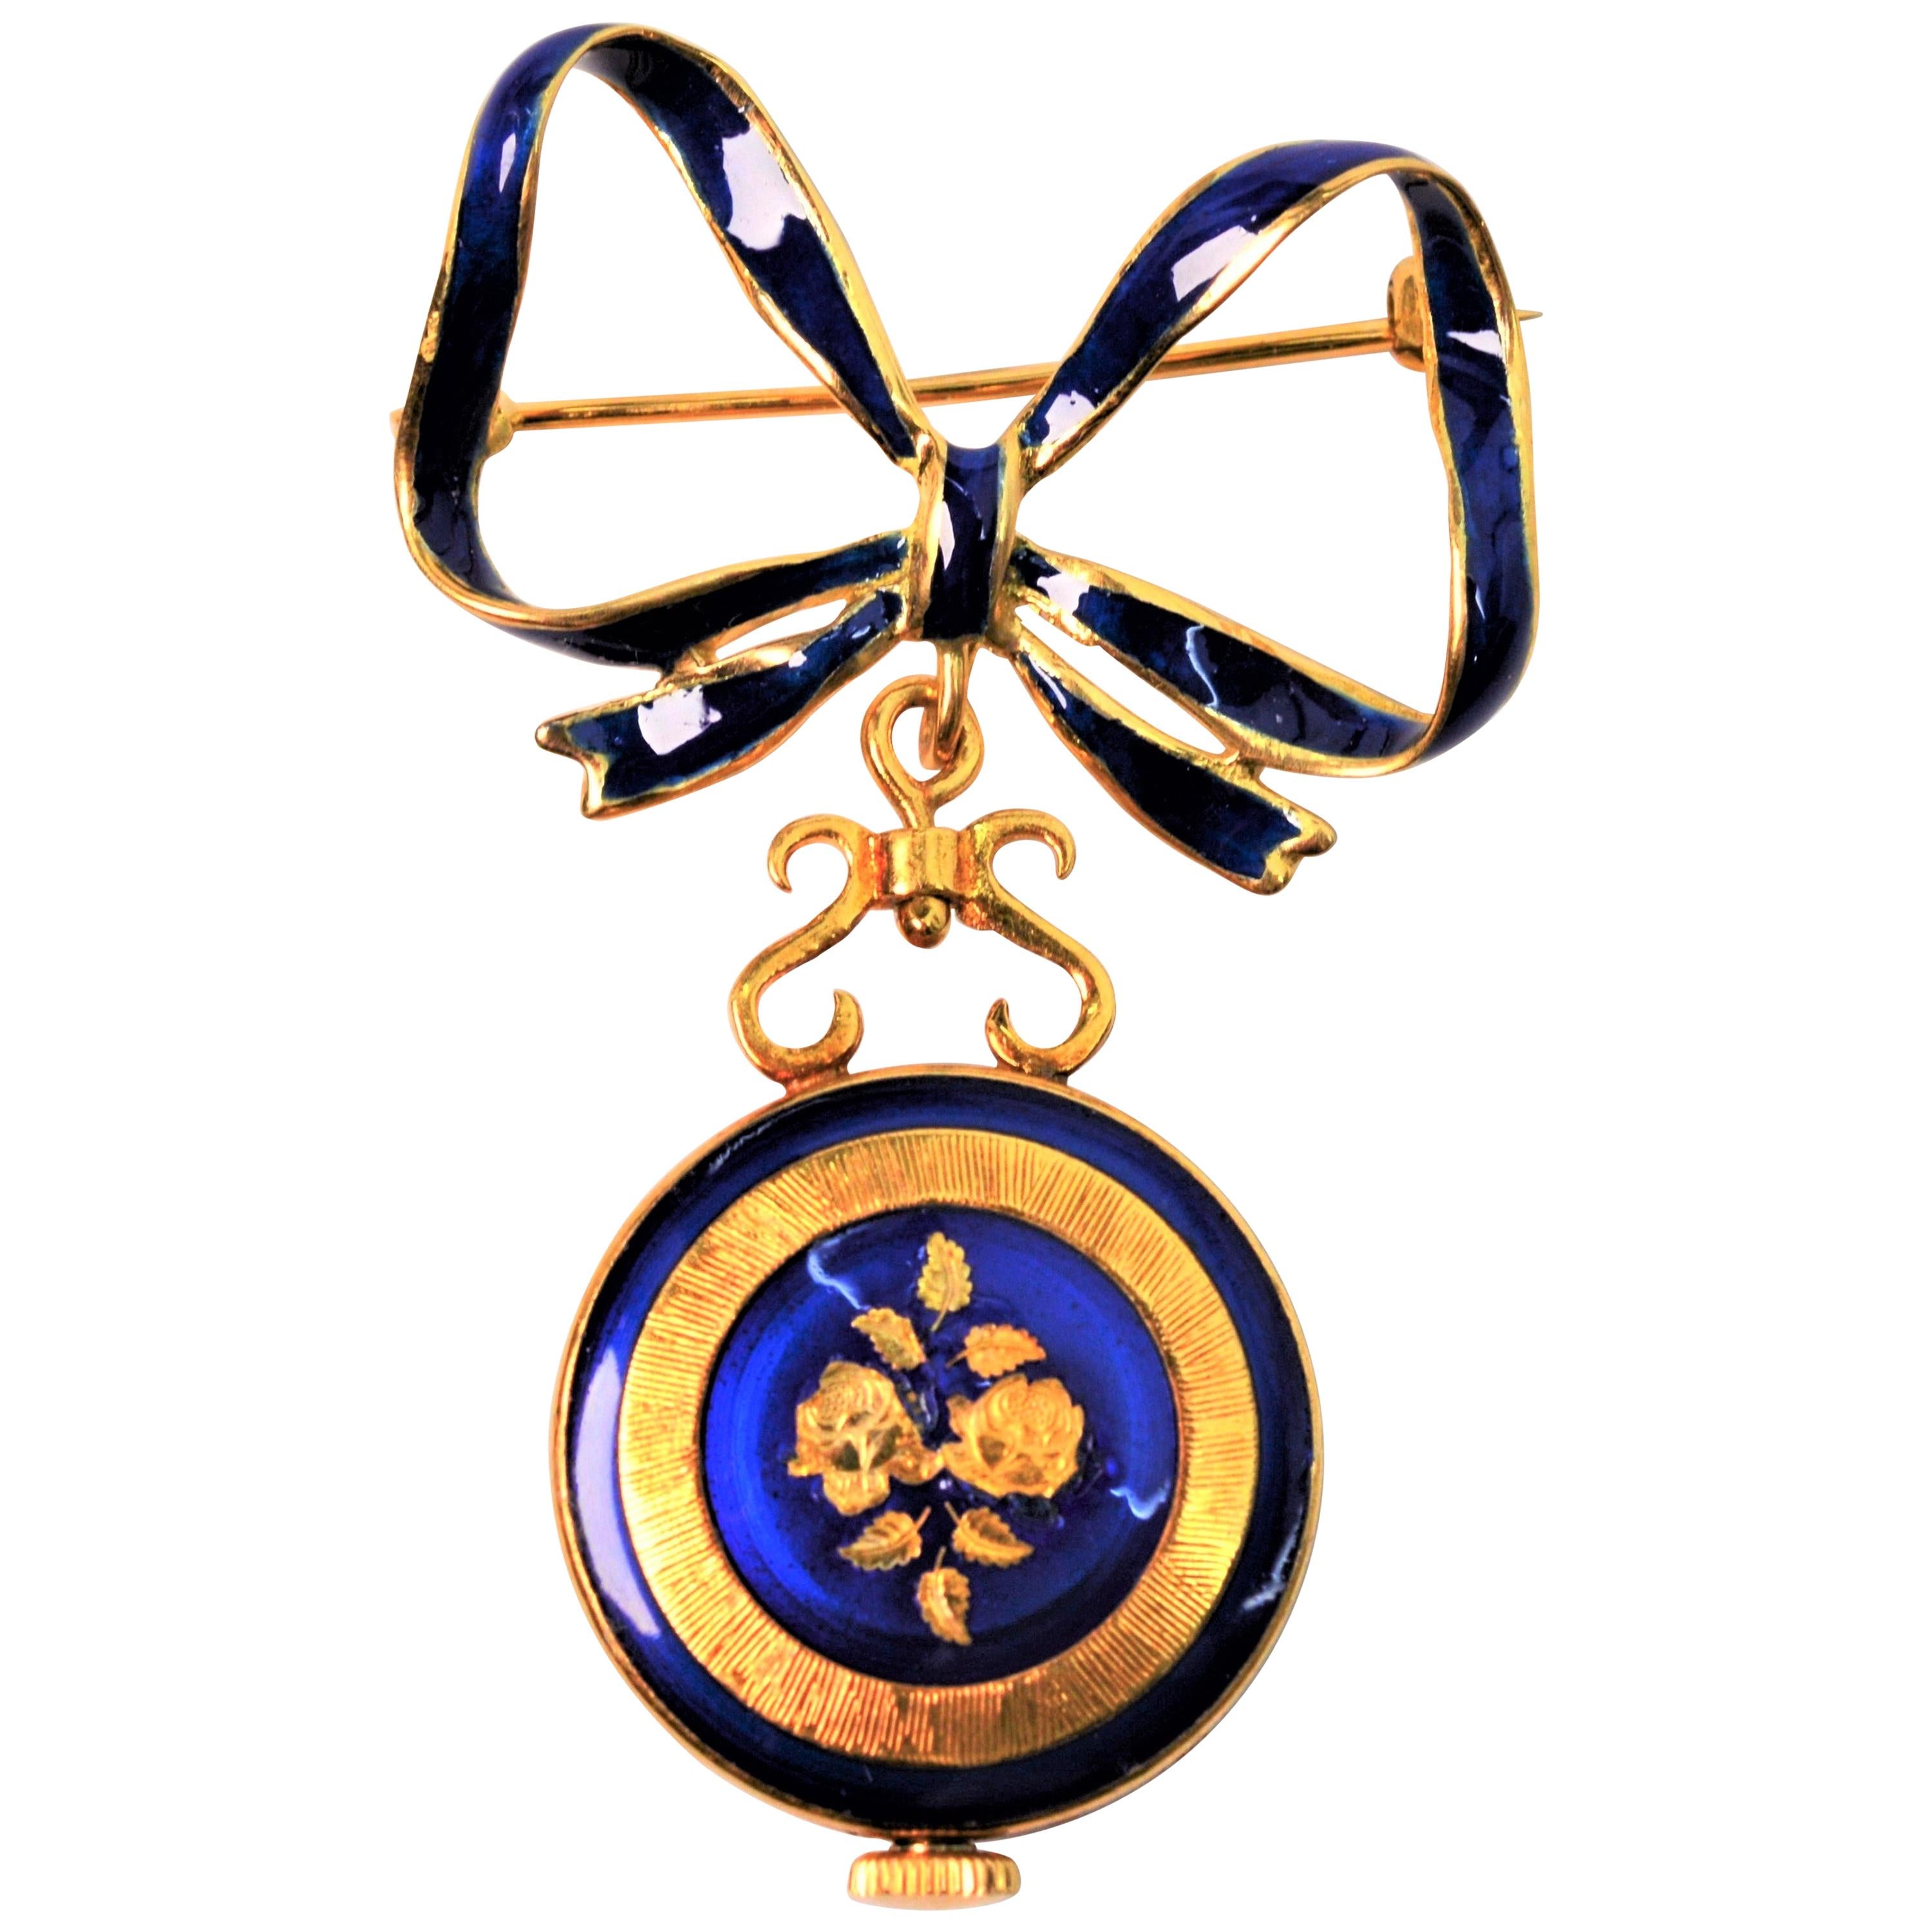 Italian Made Gold Watch Brooch with Blue Enamel Accents